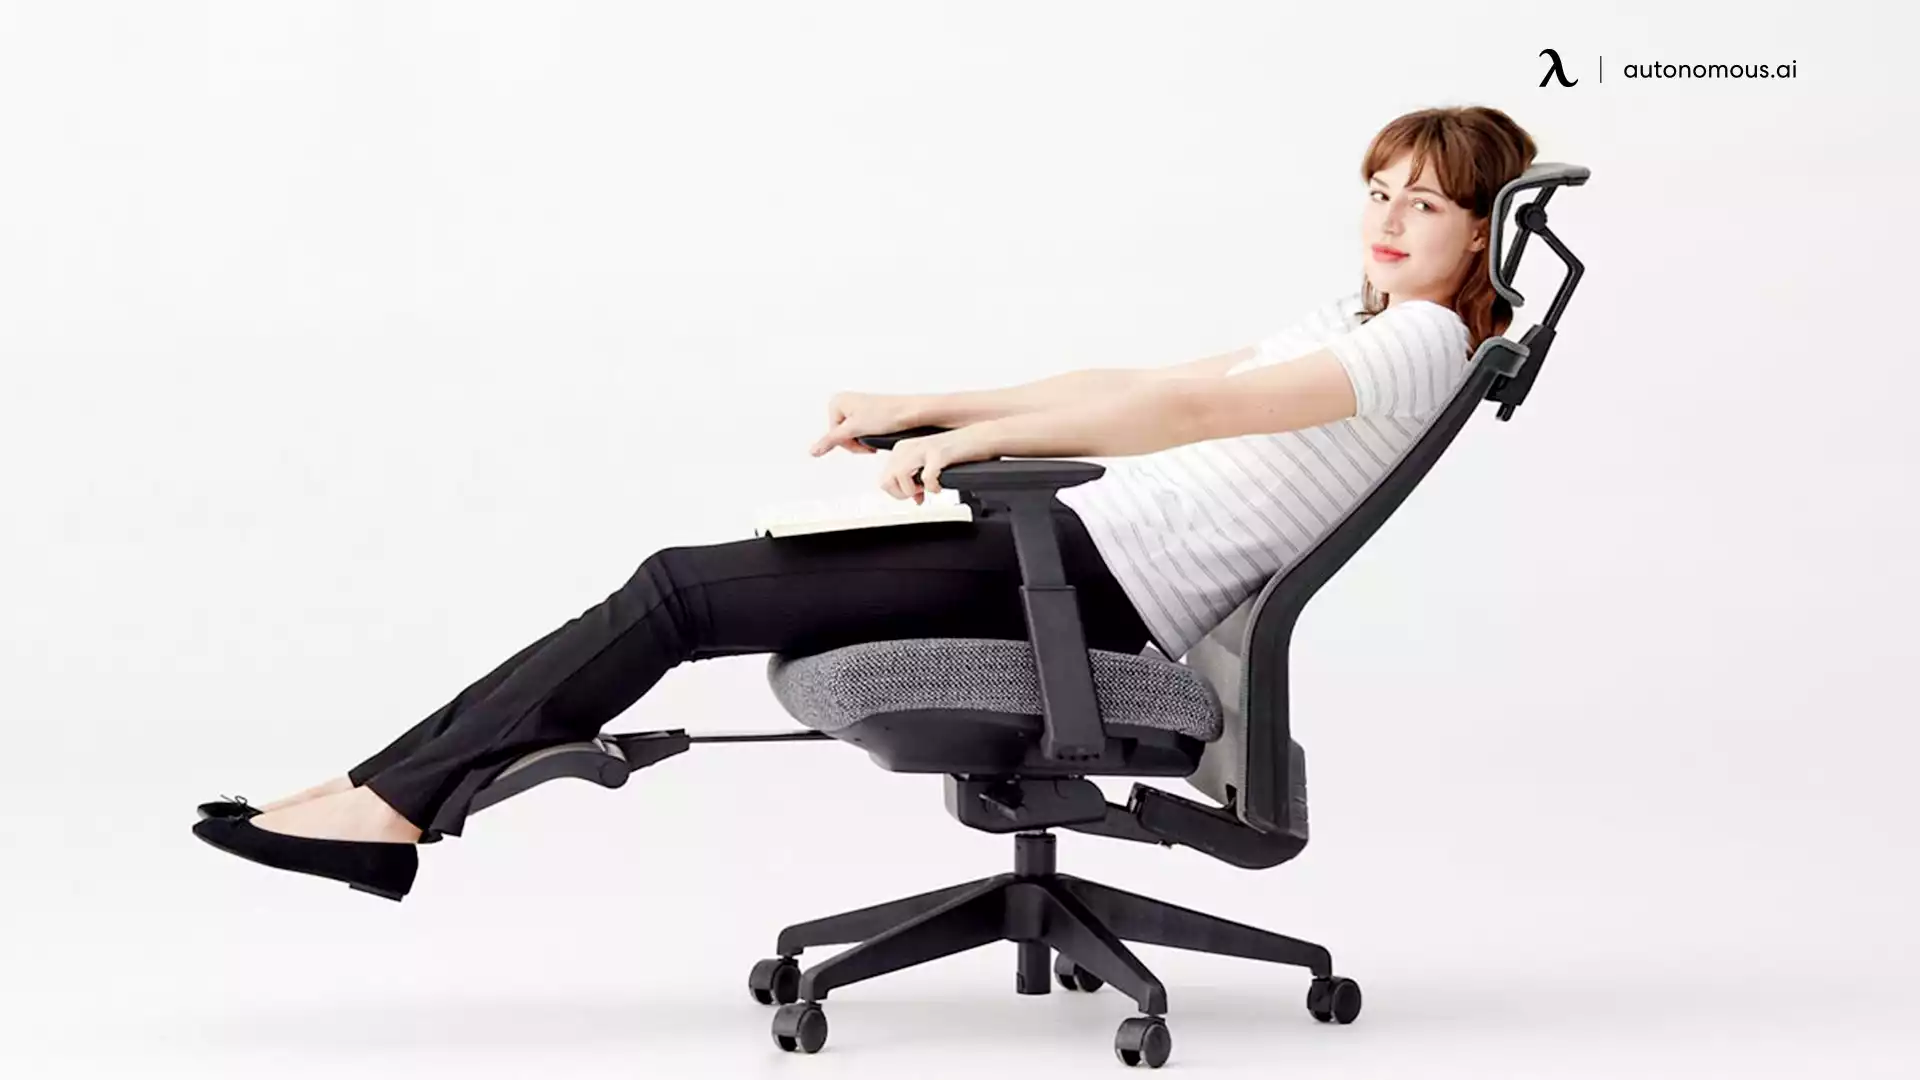 Tips on how to sleep in your chair comfortably